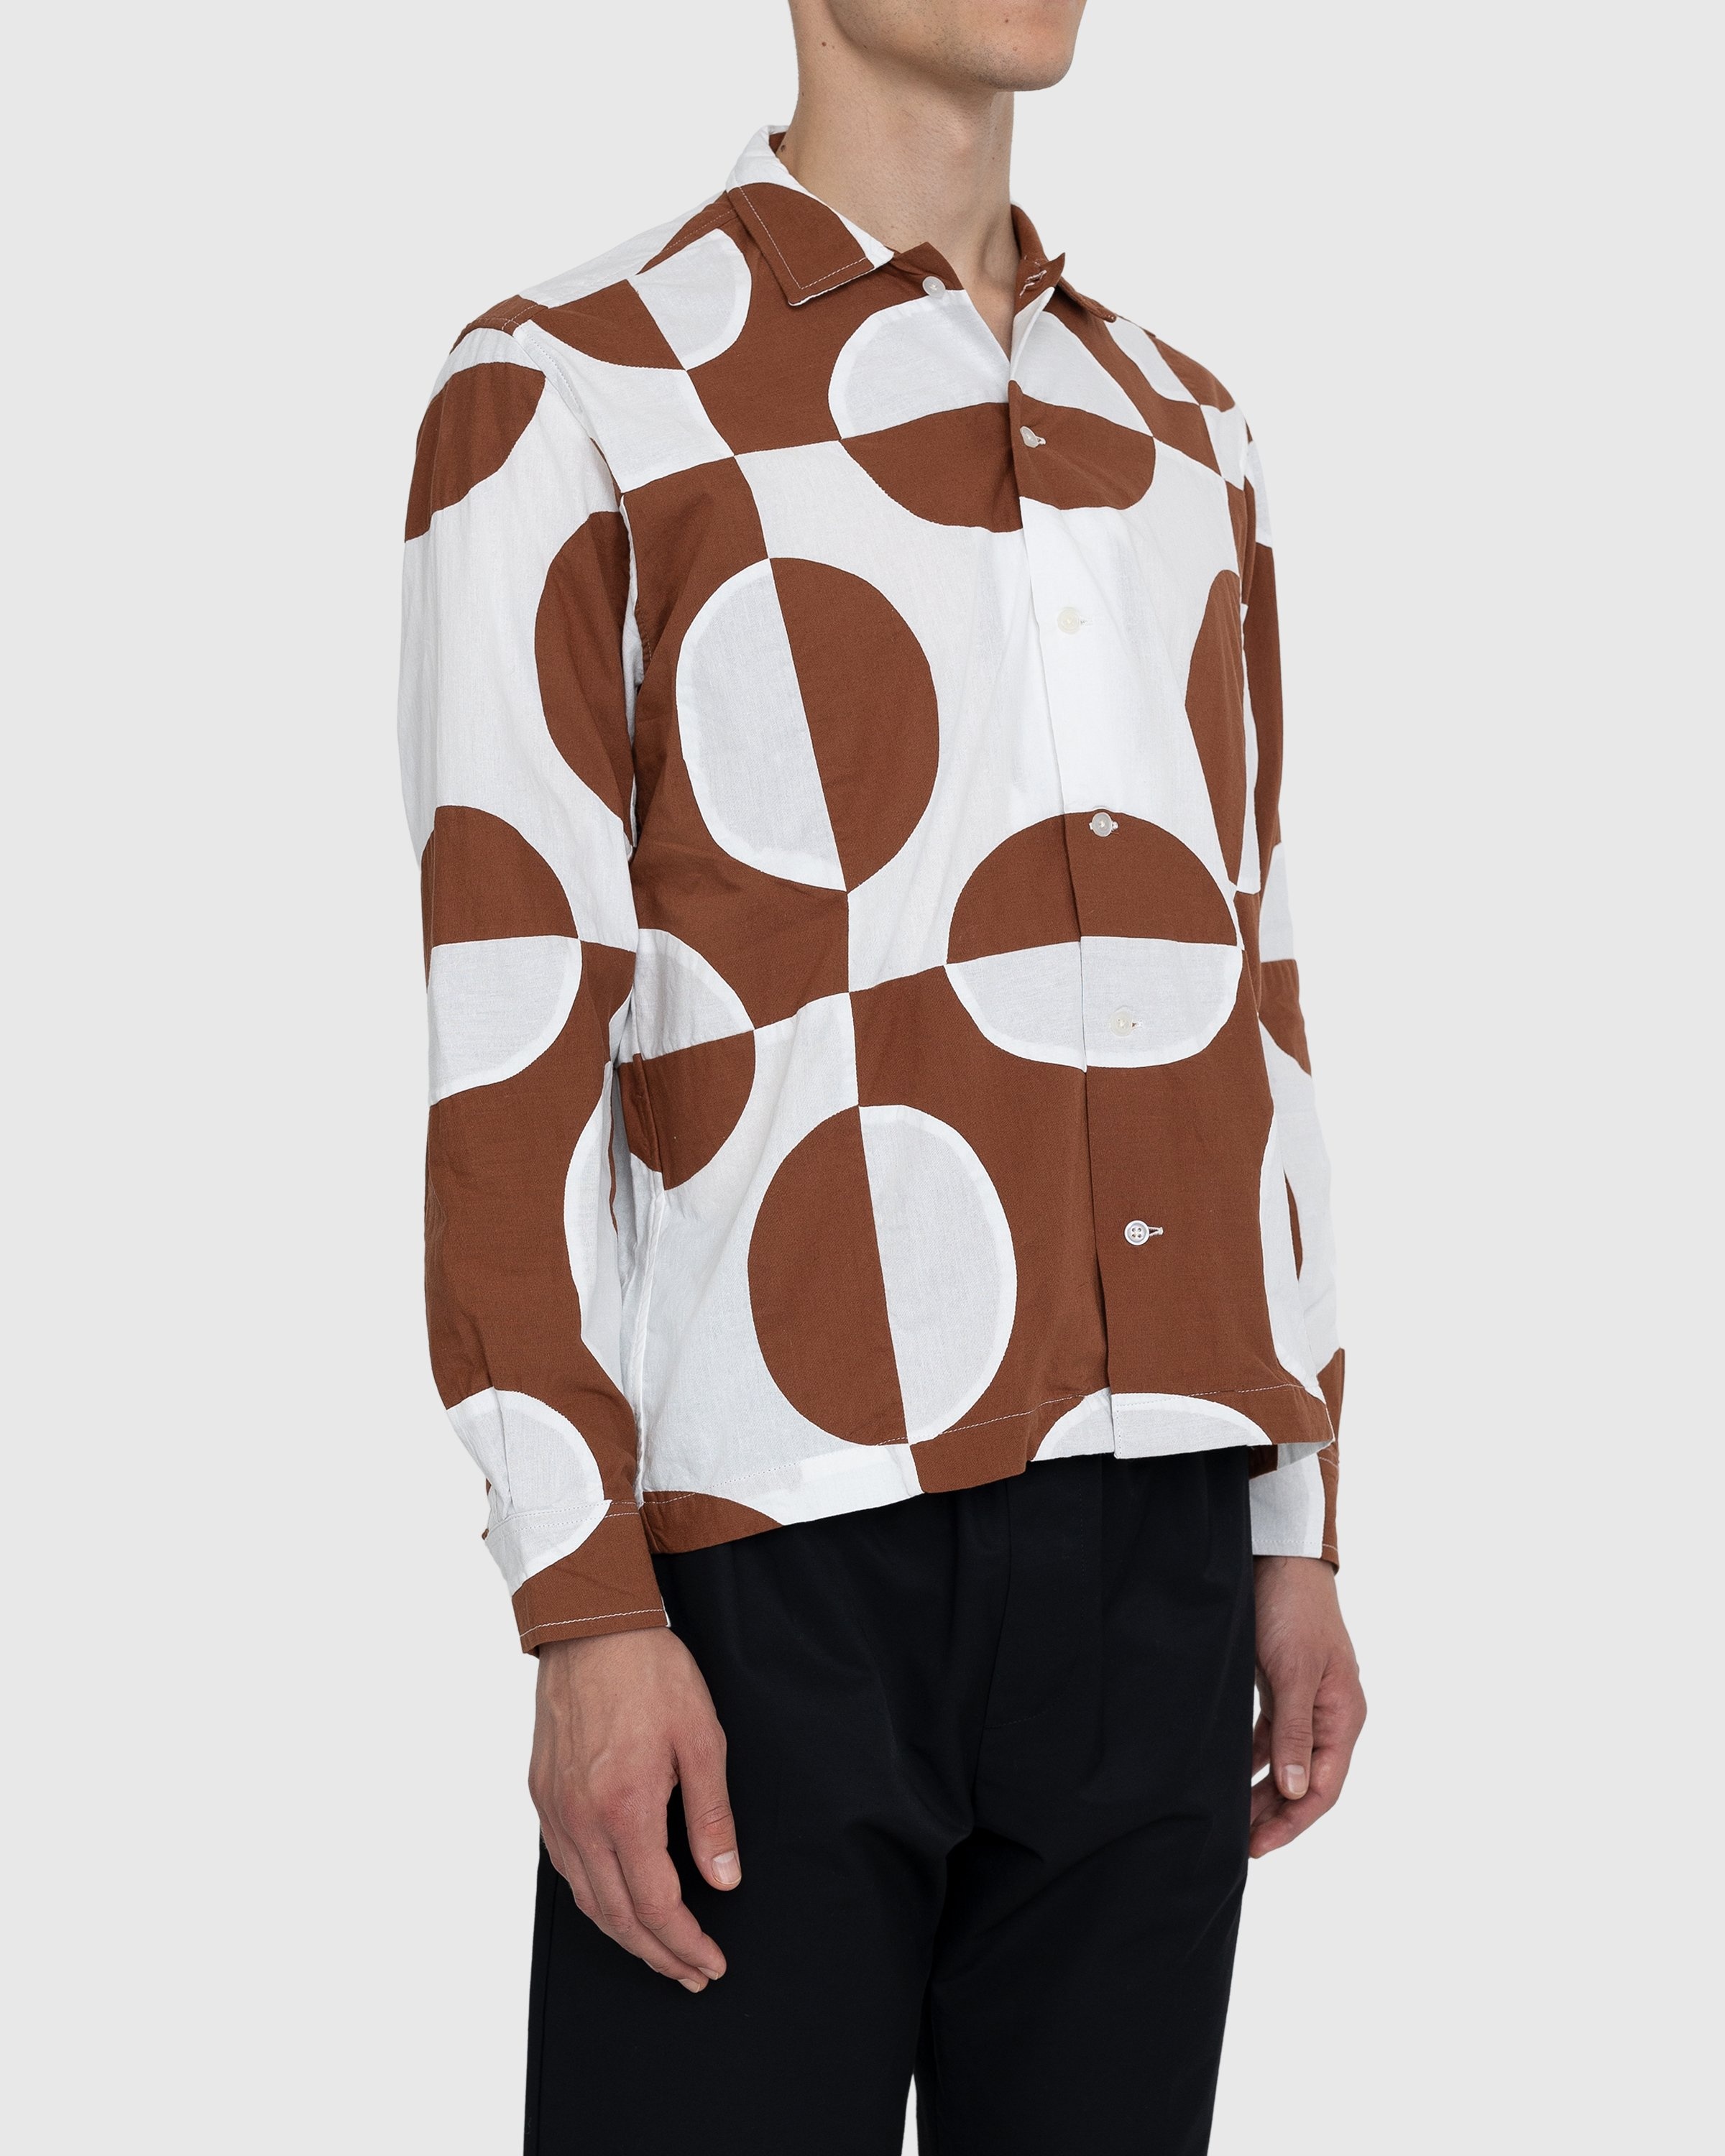 bode – Duo Oval Patchwork Long-Sleeve Shirt Brown - Shirts - Multi - Image 3